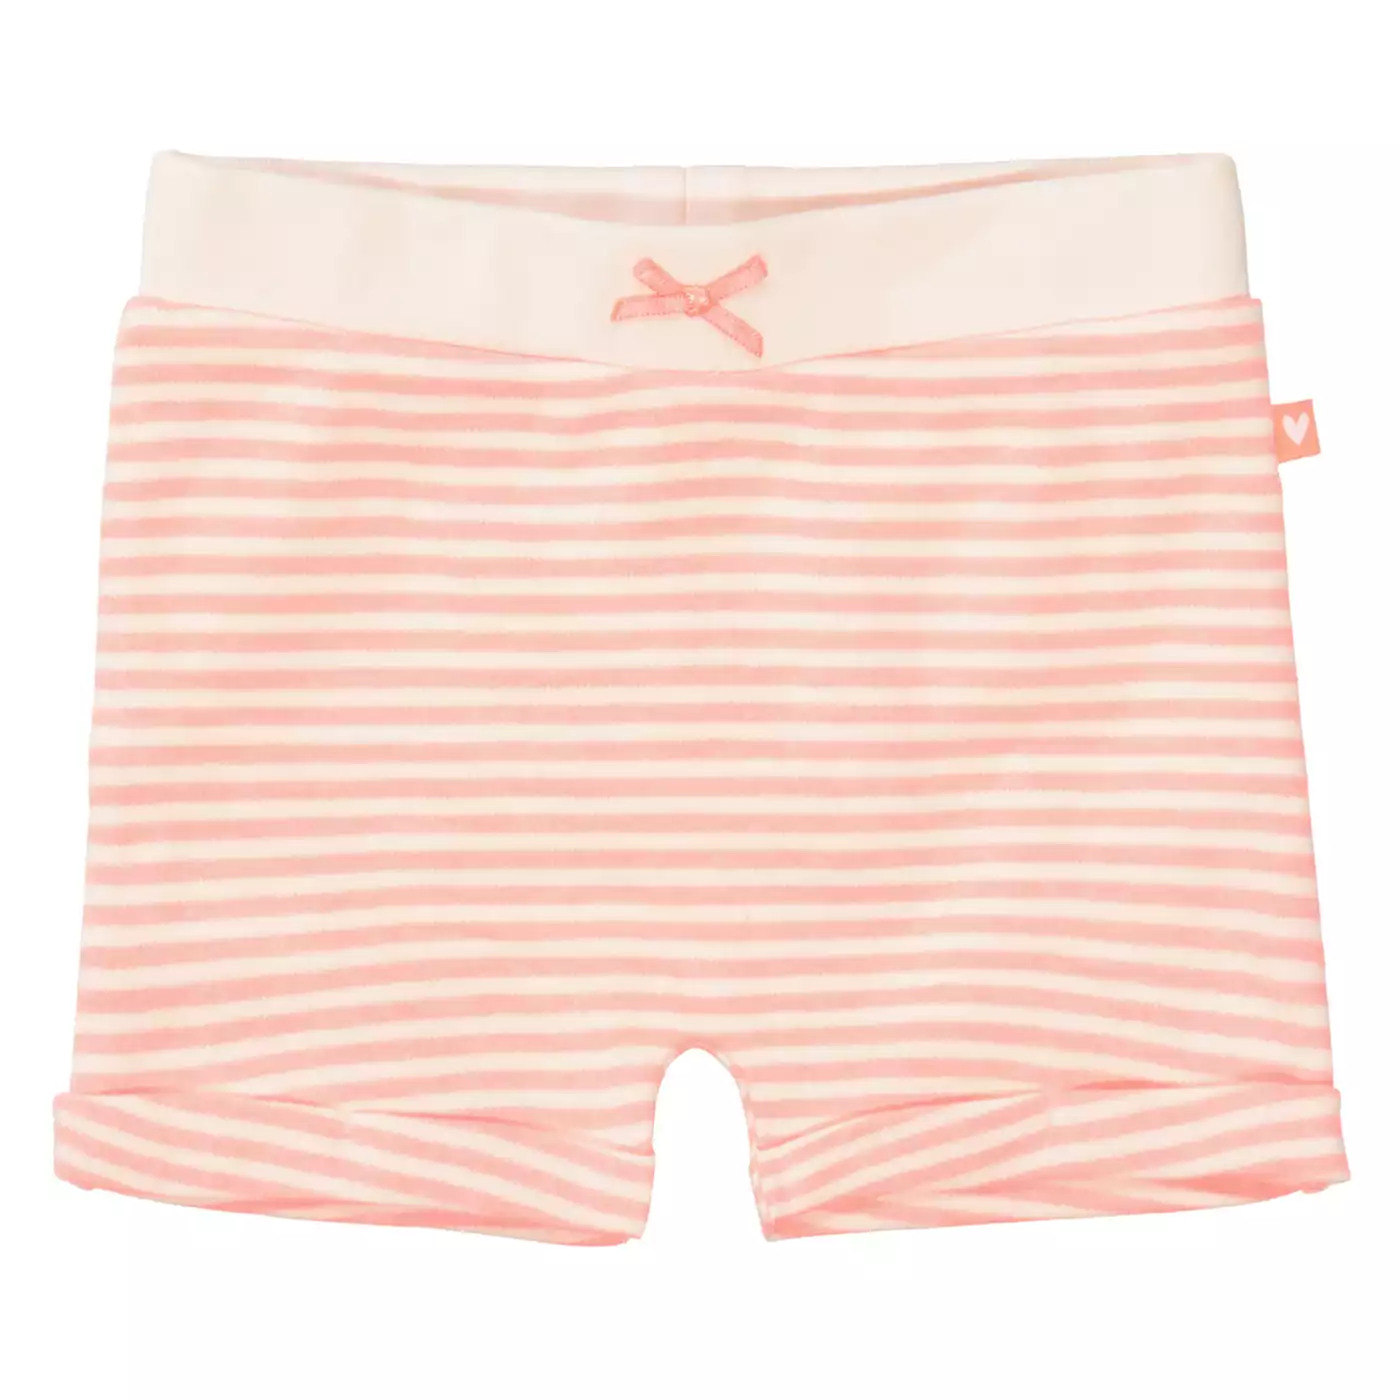 Shorts Neon Coral STACCATO Pink Rosa 2005580296100 1